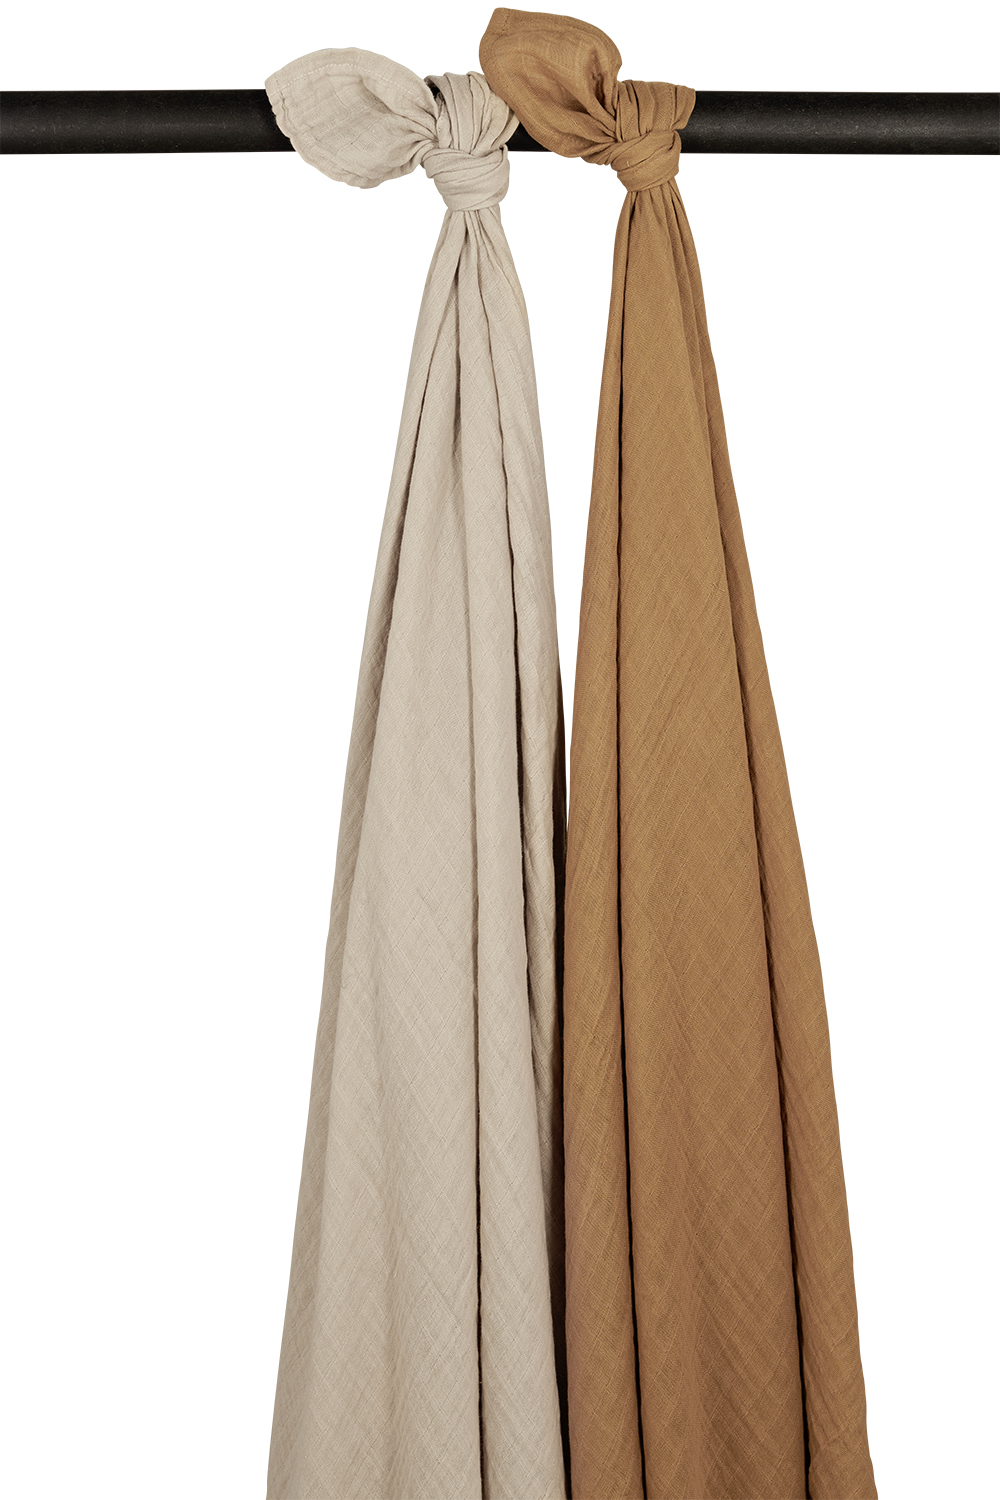 Swaddle 2-pack pre-washed muslin Uni - sand/toffee - 120x120cm